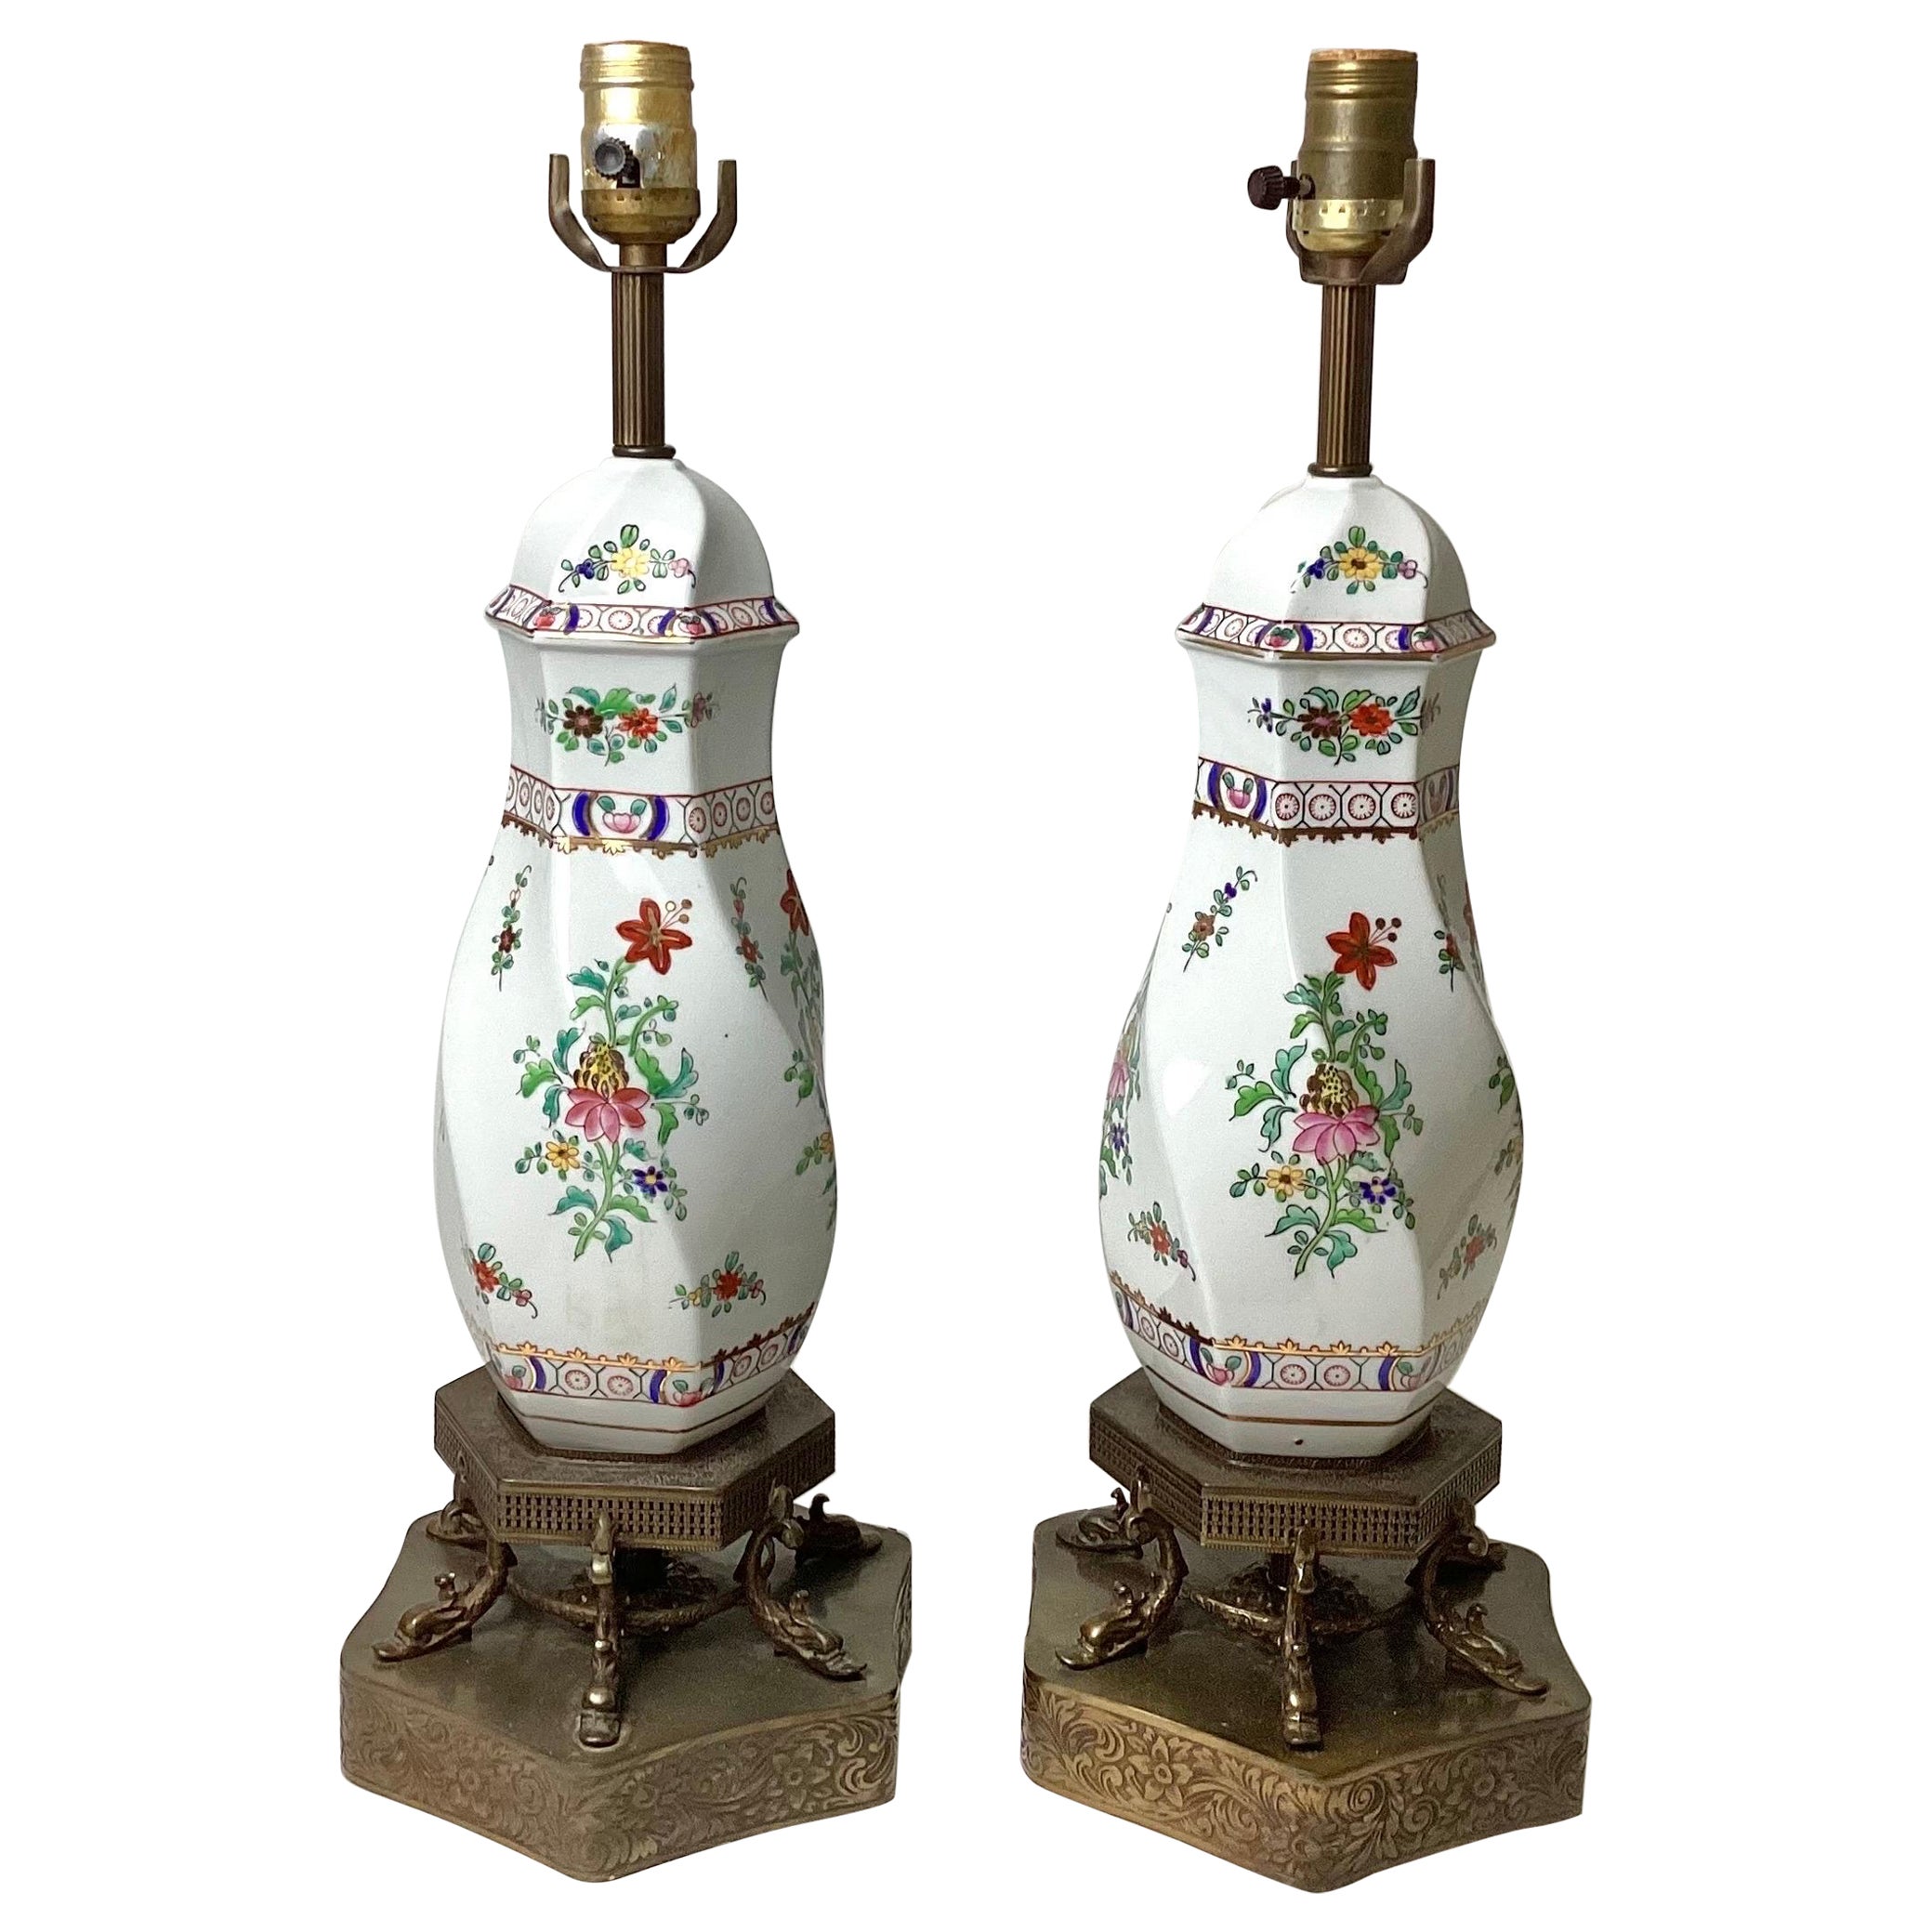 Pair of Hand-Painted Porcelain Lamps